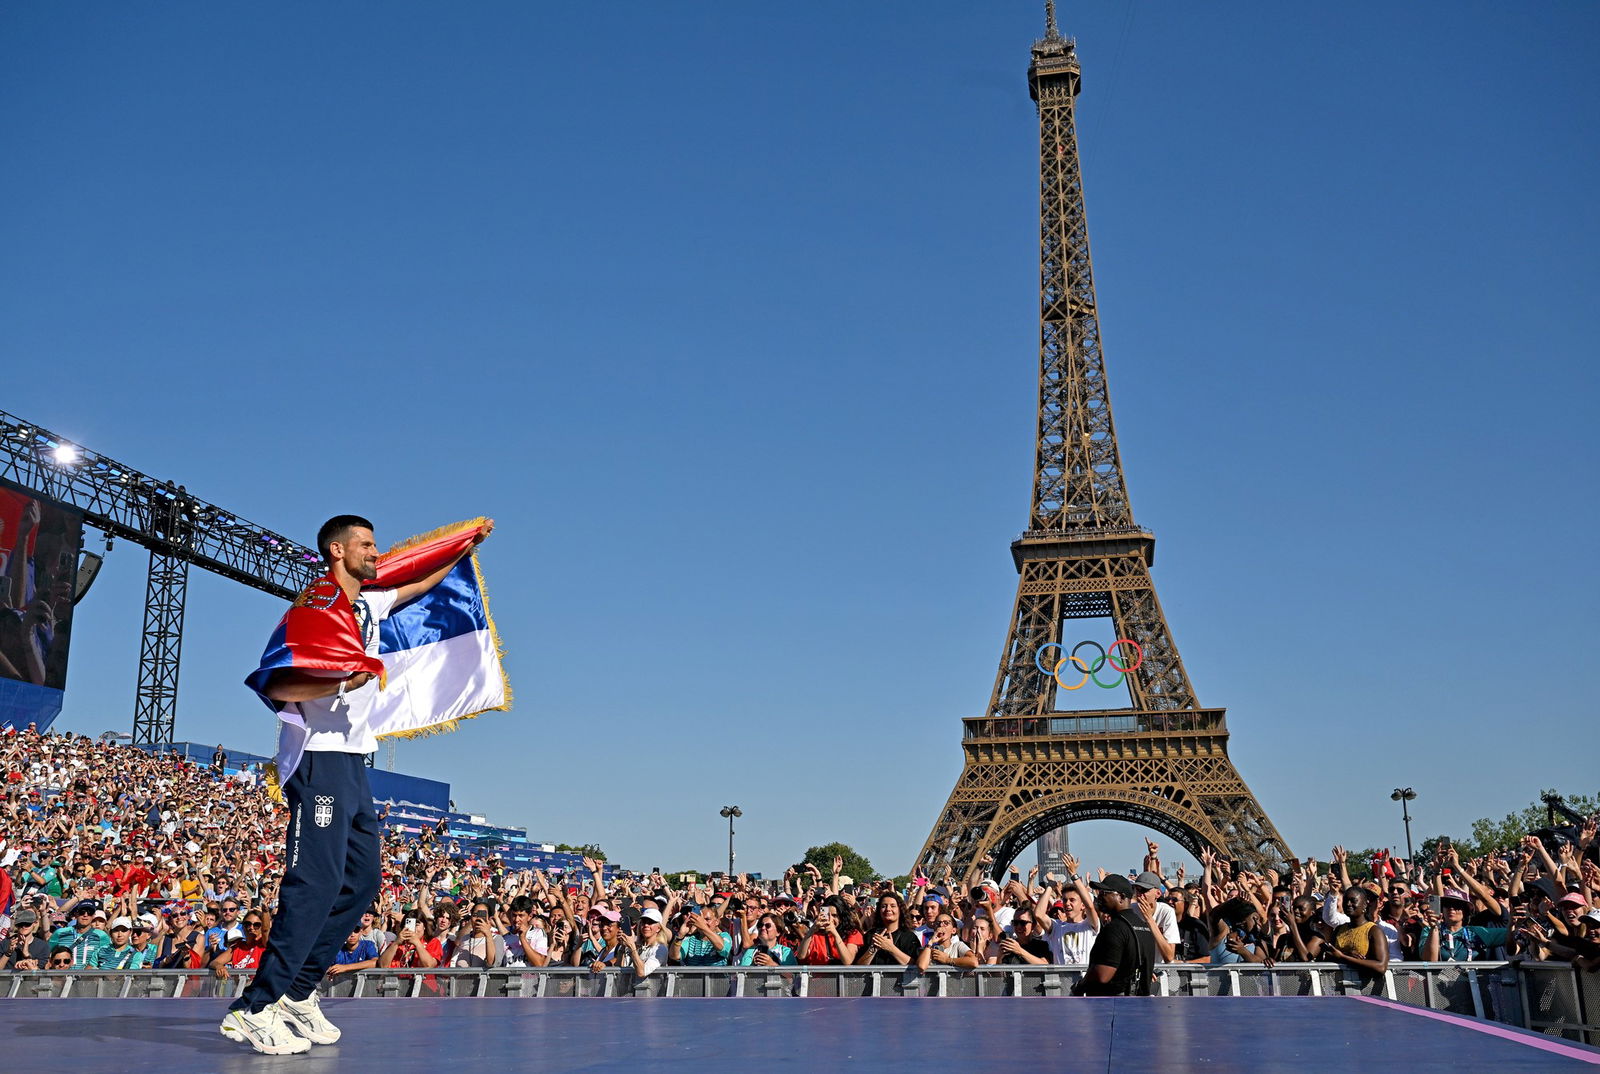 Novak Djokovic drapes a Serbian flag over himself as he shows off his tennis gold medal at the Paris Olympics in front of a crowd at the Eiffel Tower.